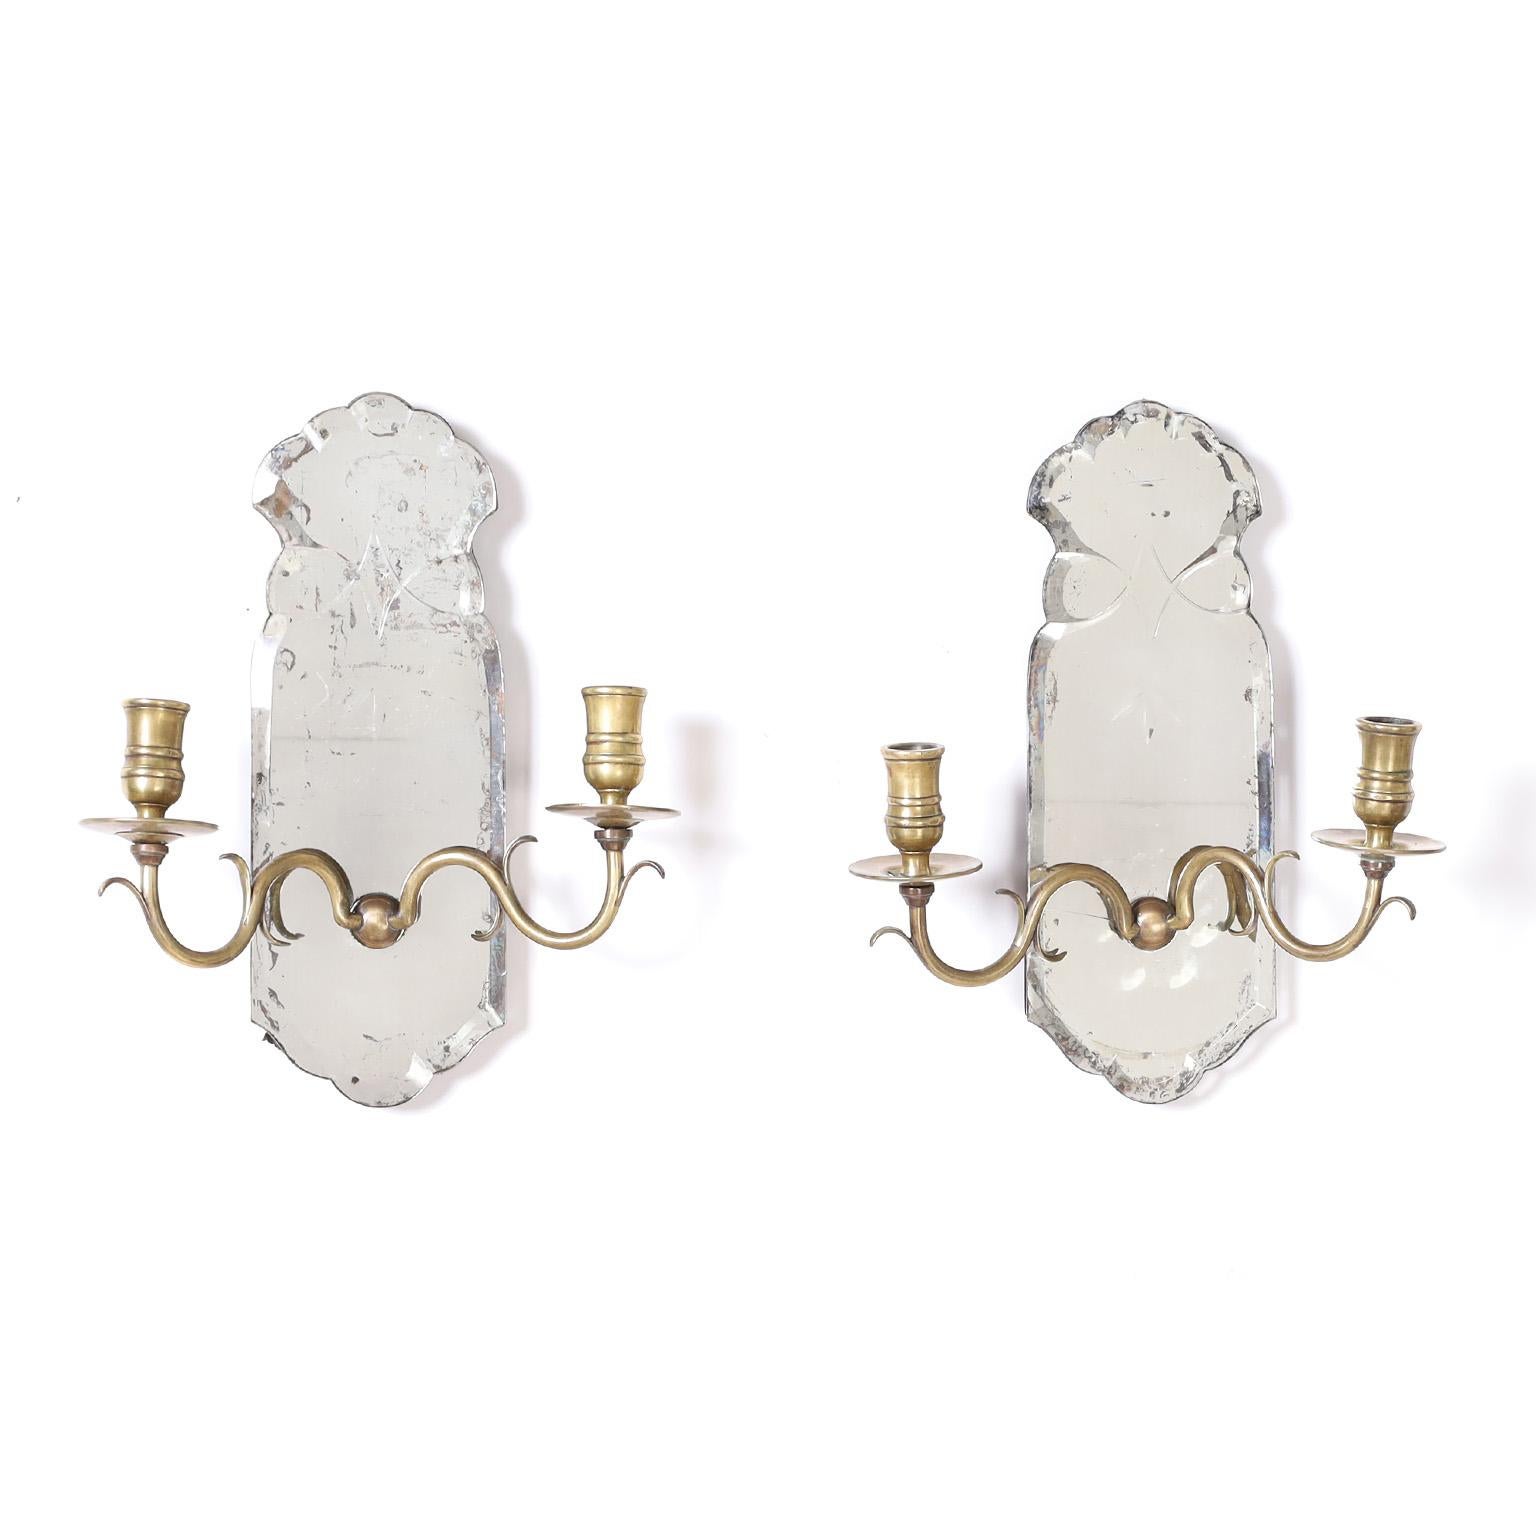 Antique English Mirrored Two Light Wall Sconces In Good Condition For Sale In Palm Beach, FL